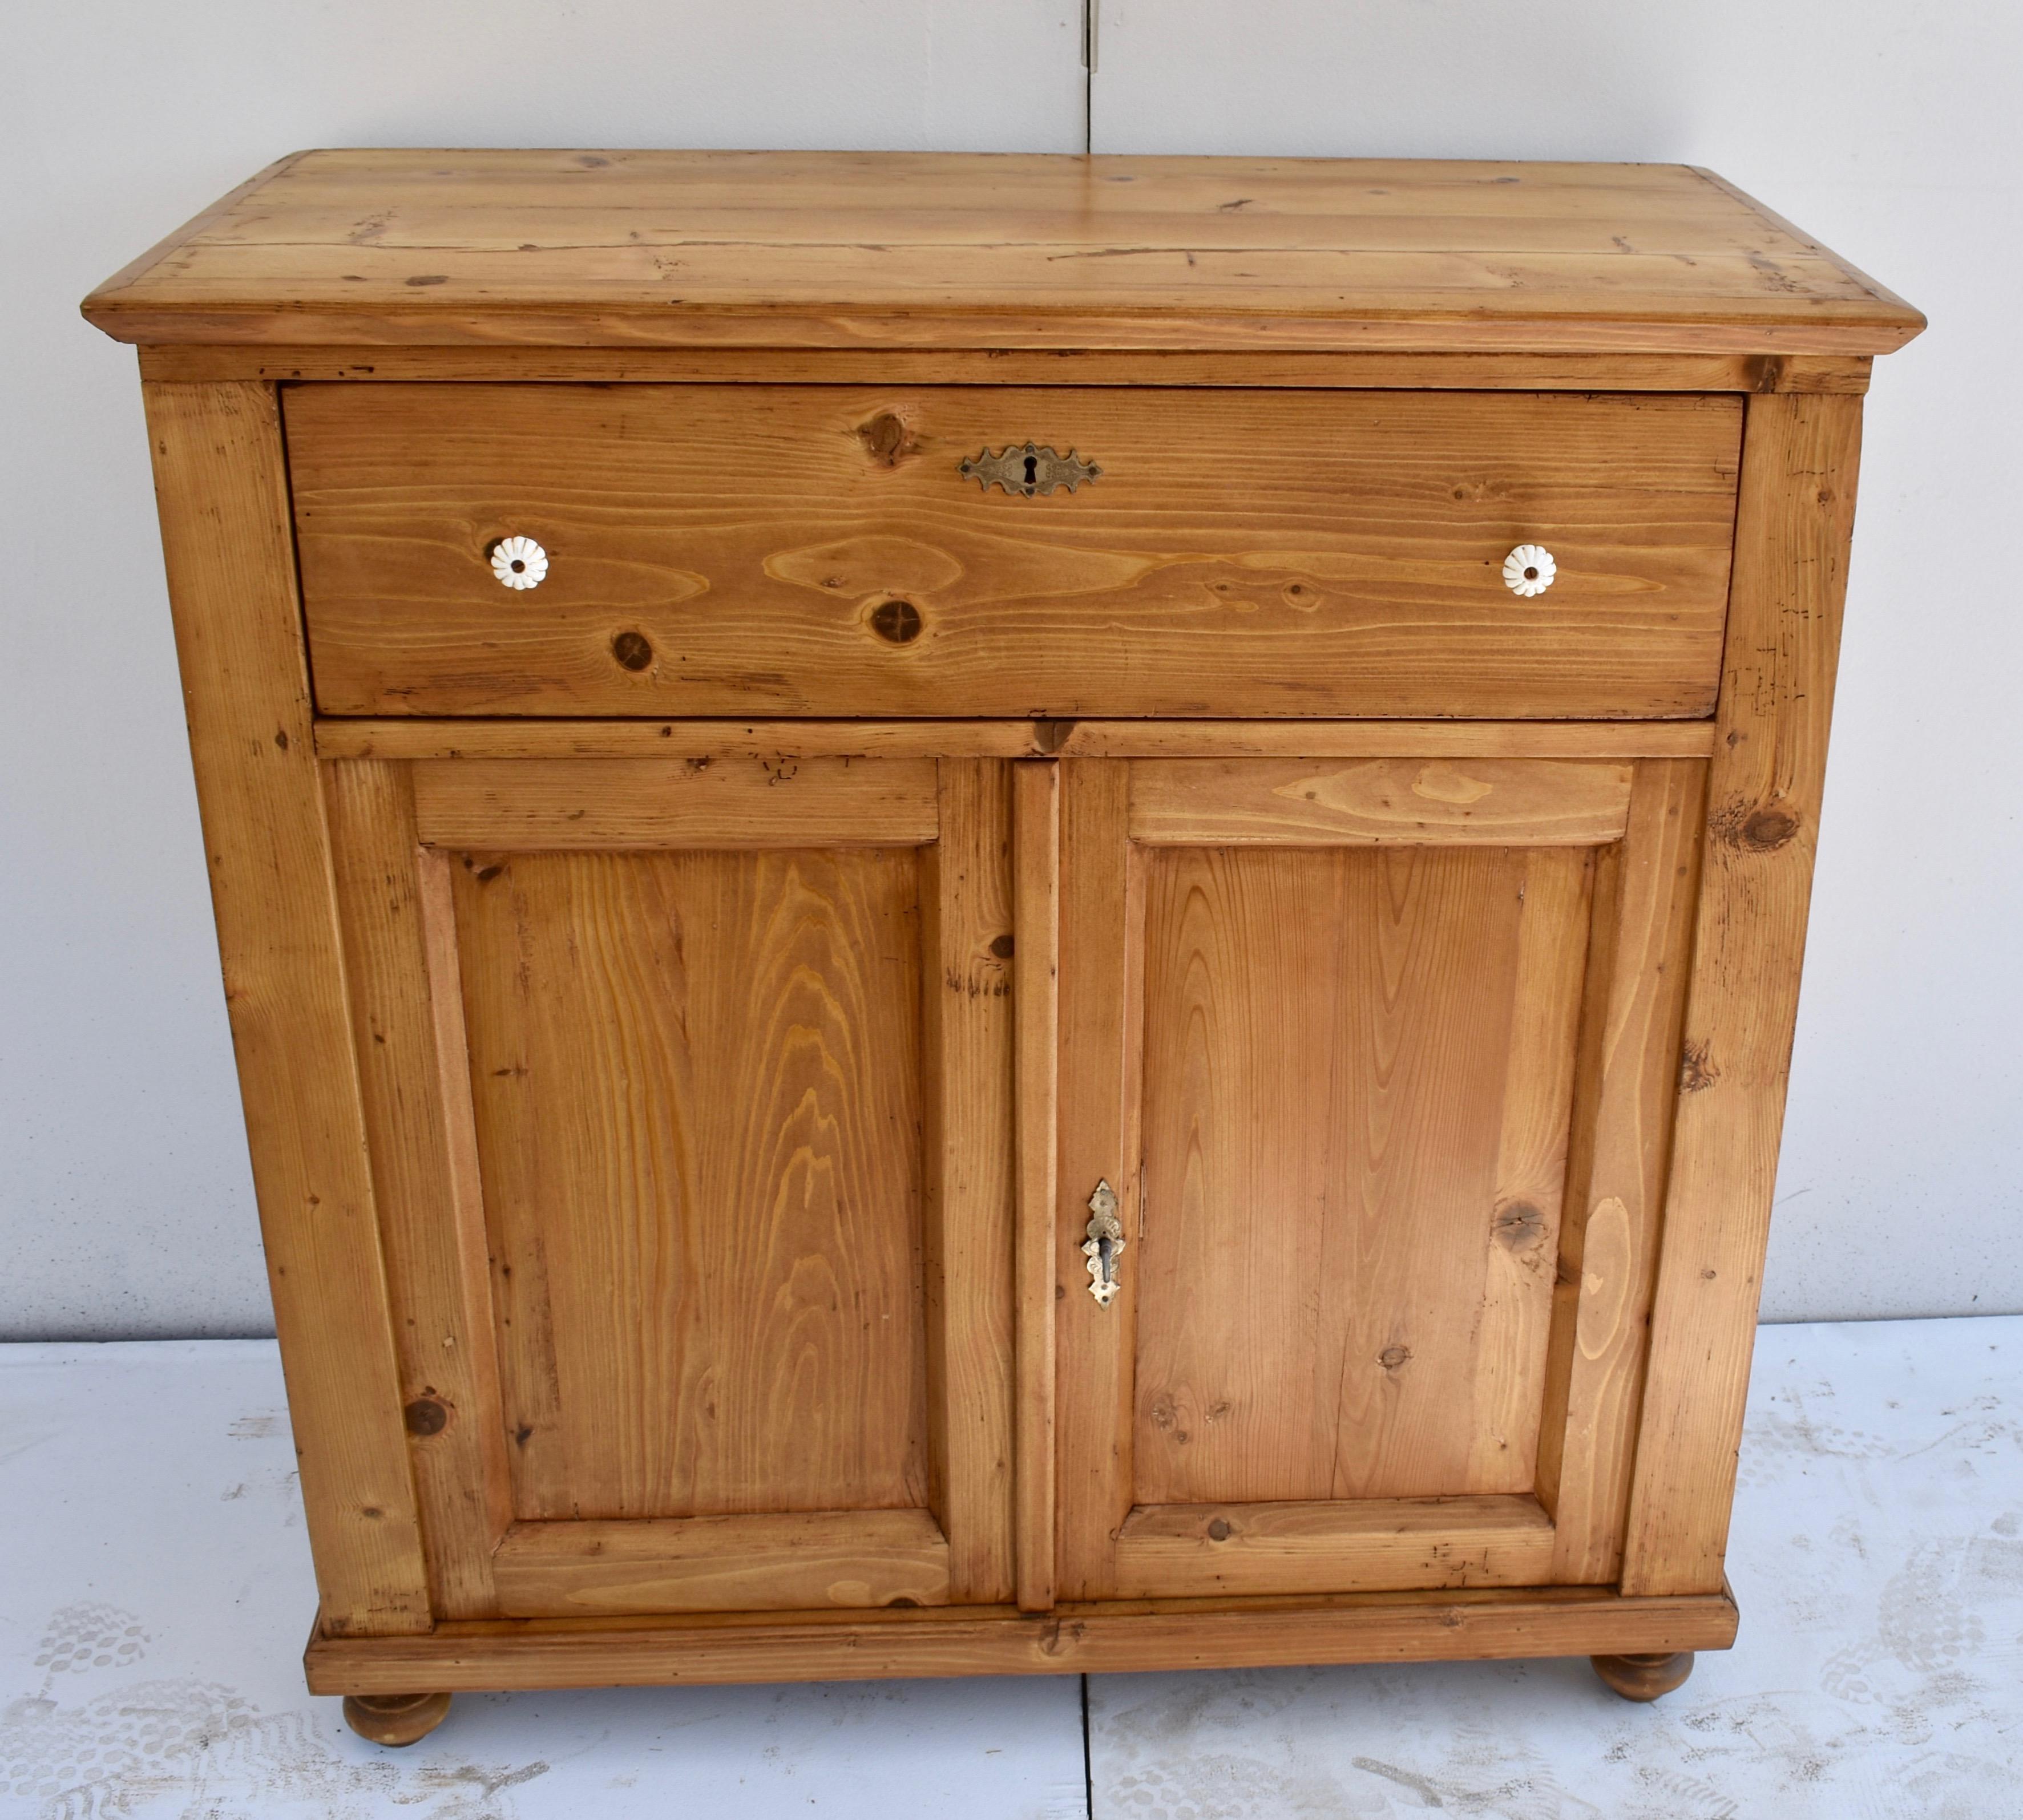 This plain and simple two door dresser base is built solidly using thick stock and its sturdy form has real country charm. The top is bordered with a crown molding and sits above a single deep drawer. Two doors with flat panels in chamfered frames